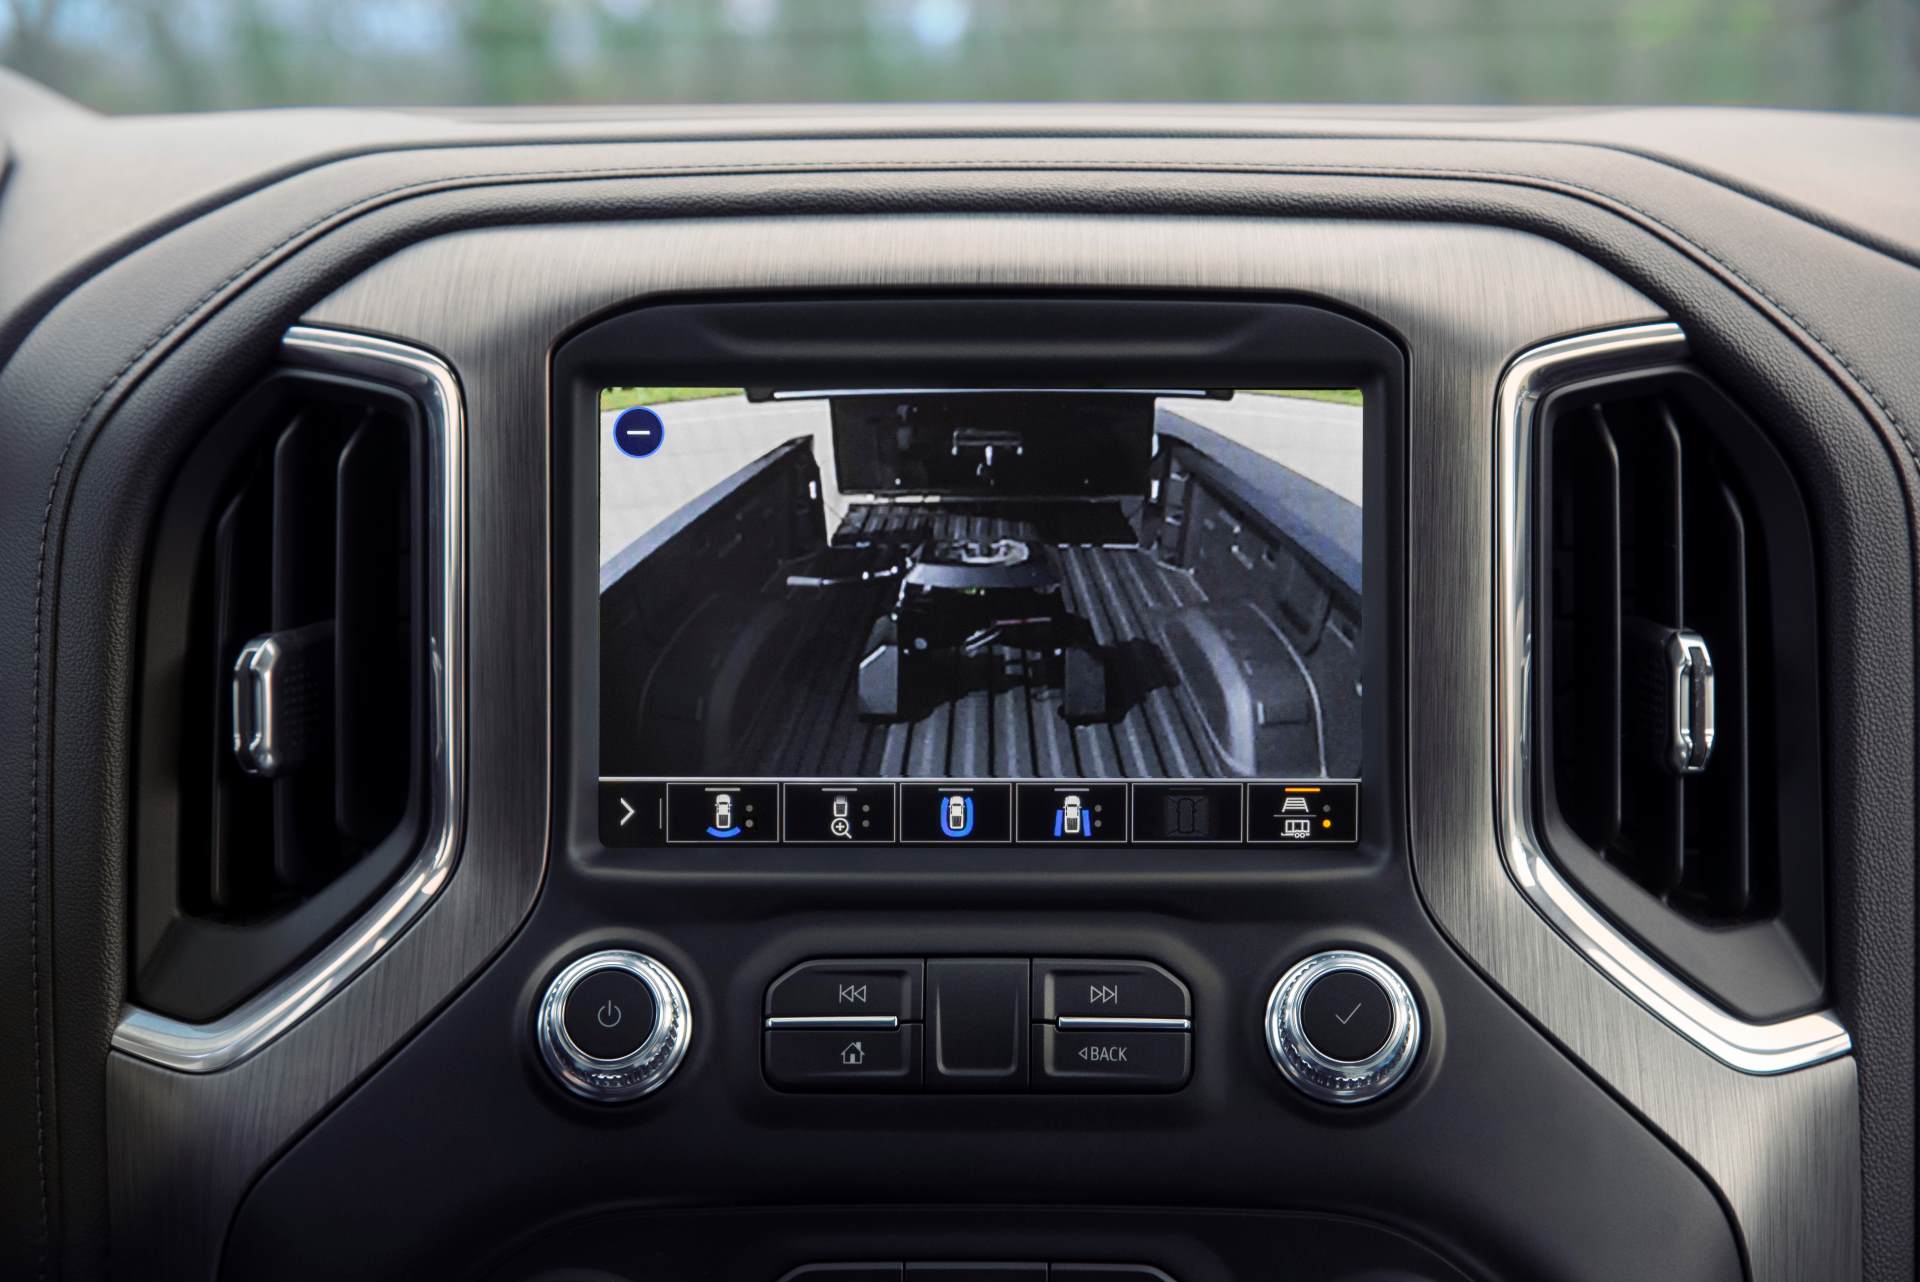 infotainment screen engaged in trailering safety monitoring, the image on-screen prominently featuring a 5-th wheel hitch